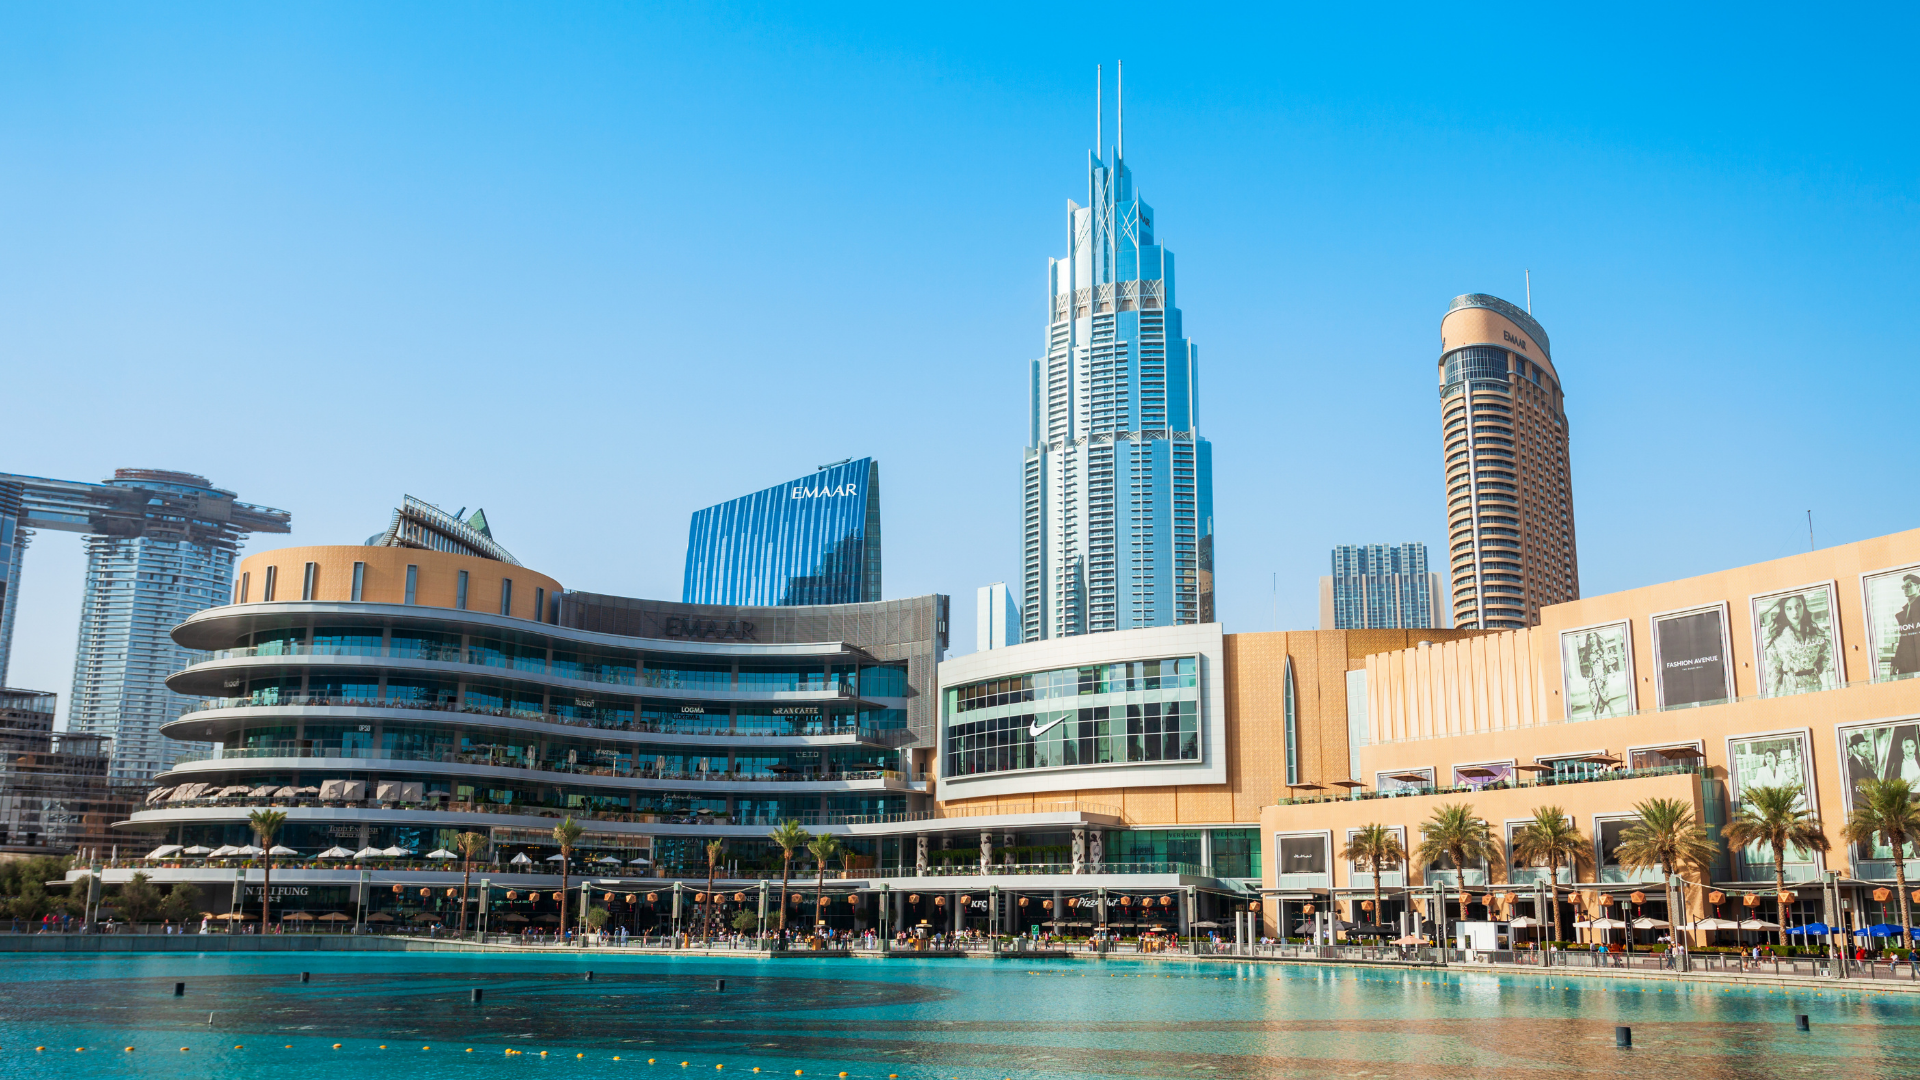 Tourist to get a free discount card on arrival in Dubai